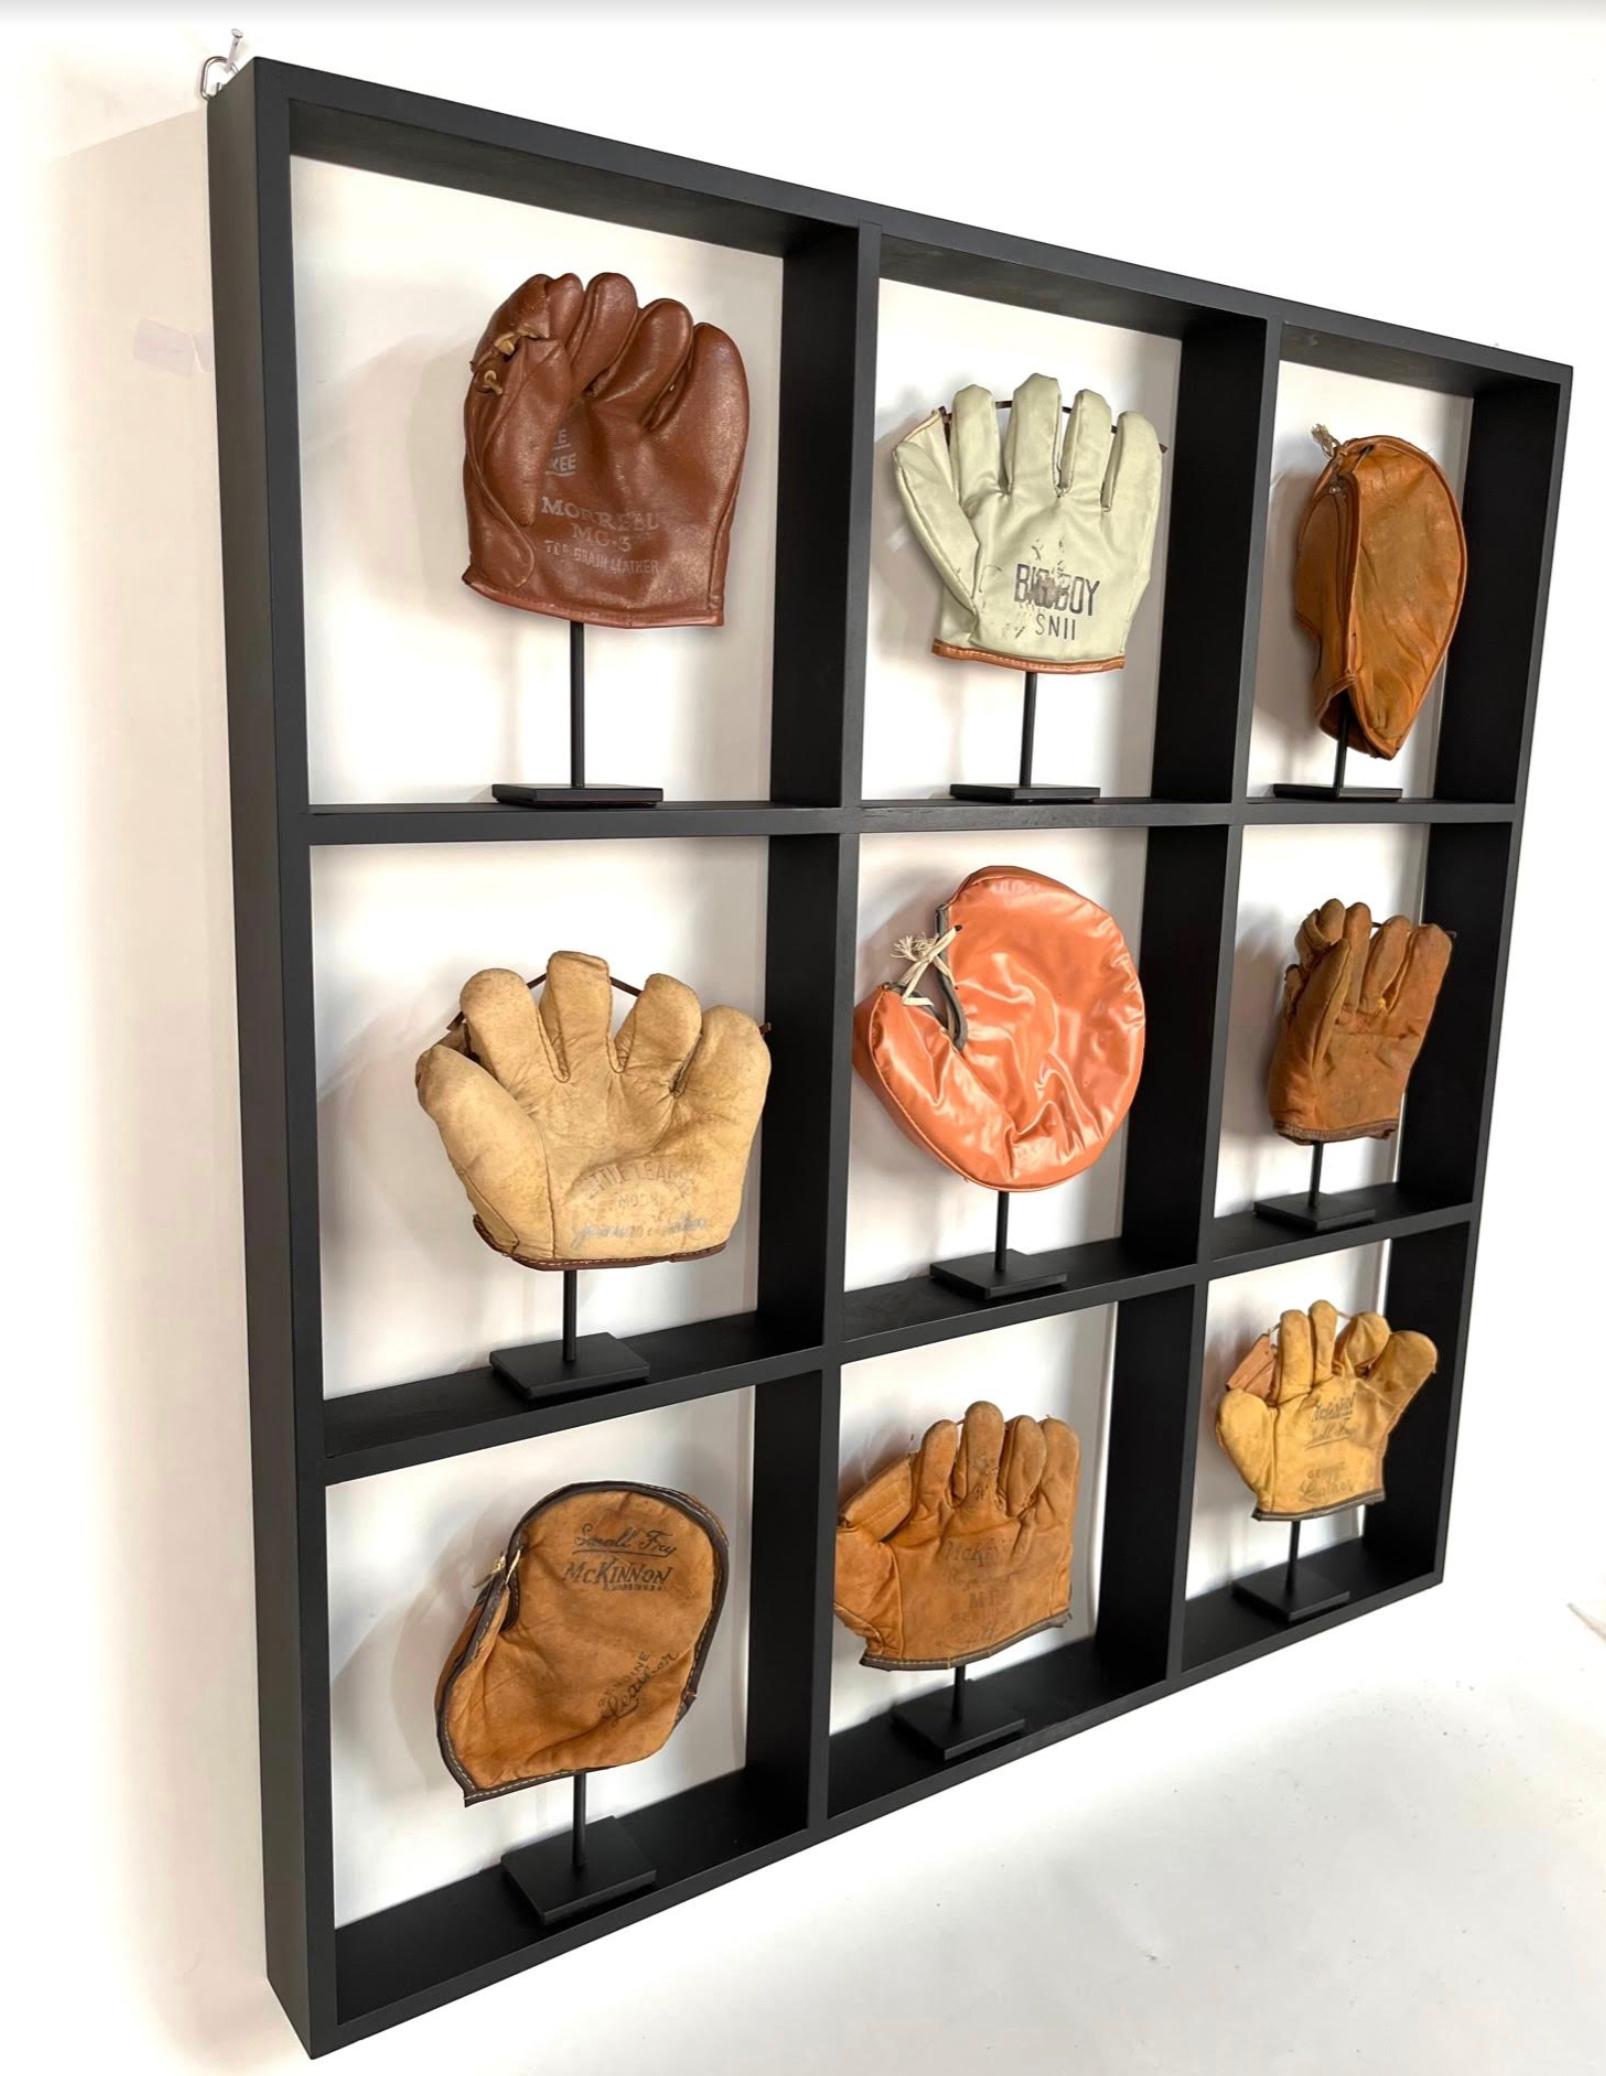 American Rare Antique Childs Small Baseball Glove Display